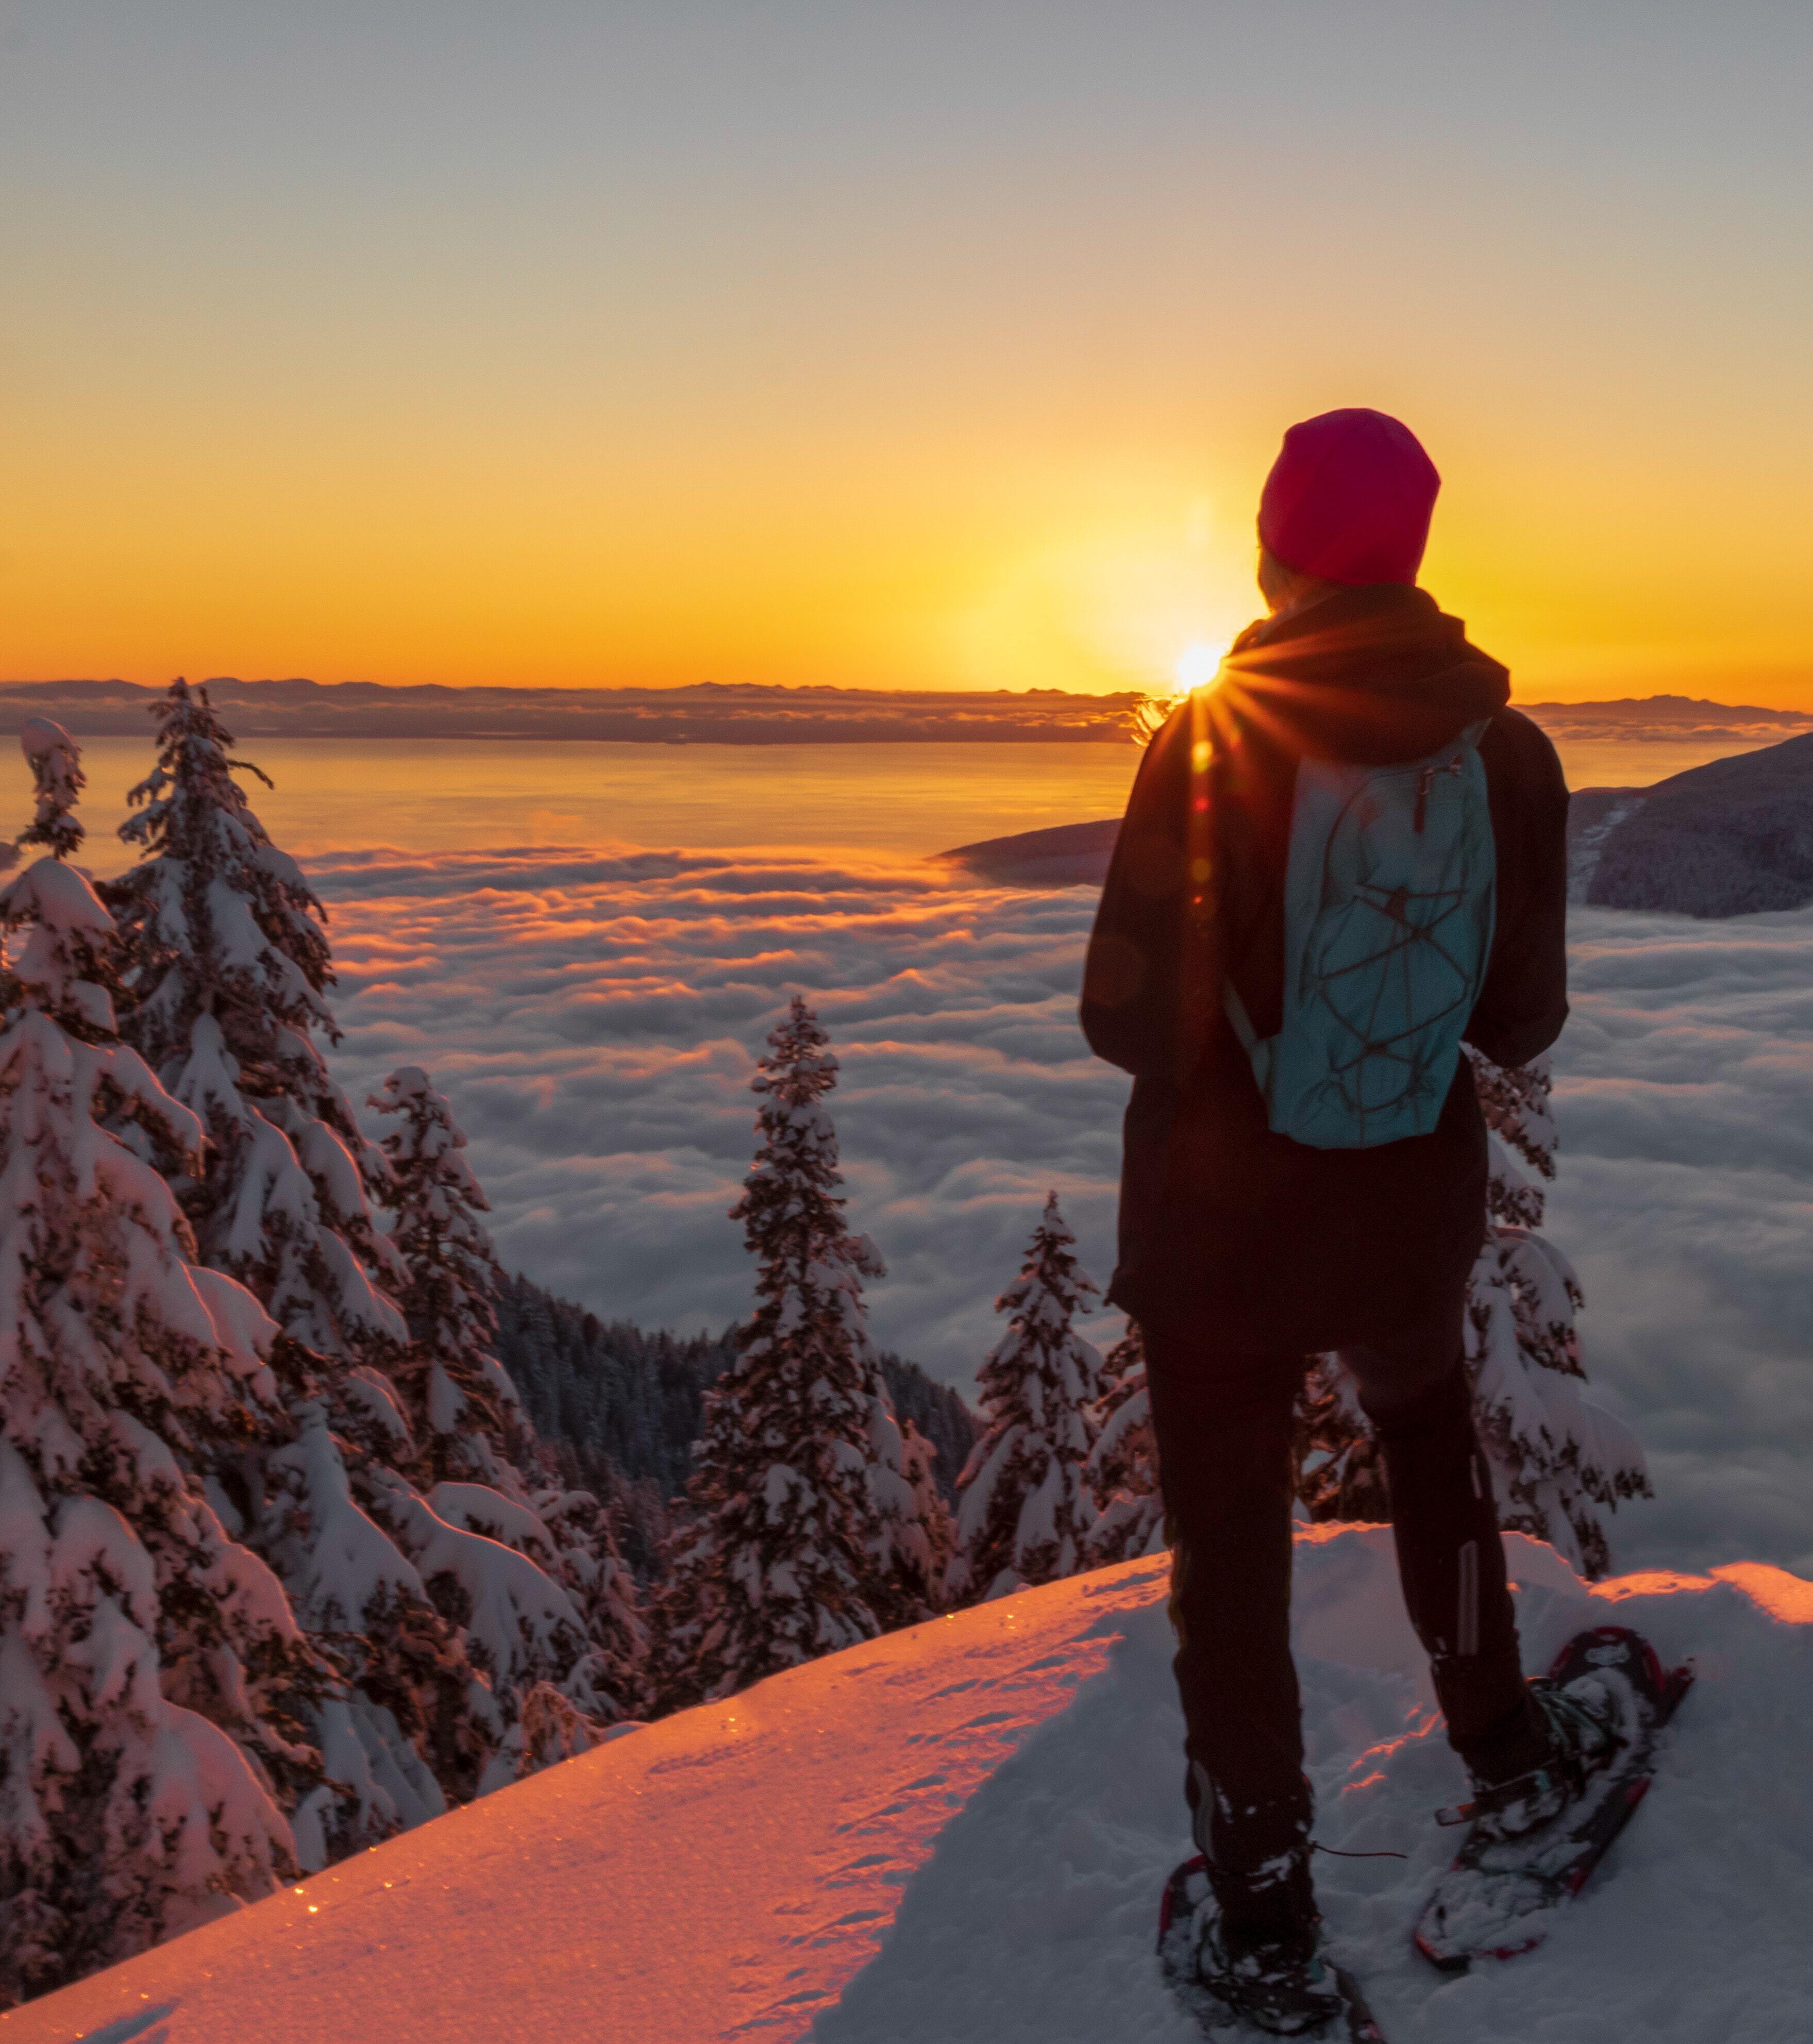 A person who snowshoed to the top of a mountain and is looking at the sunset